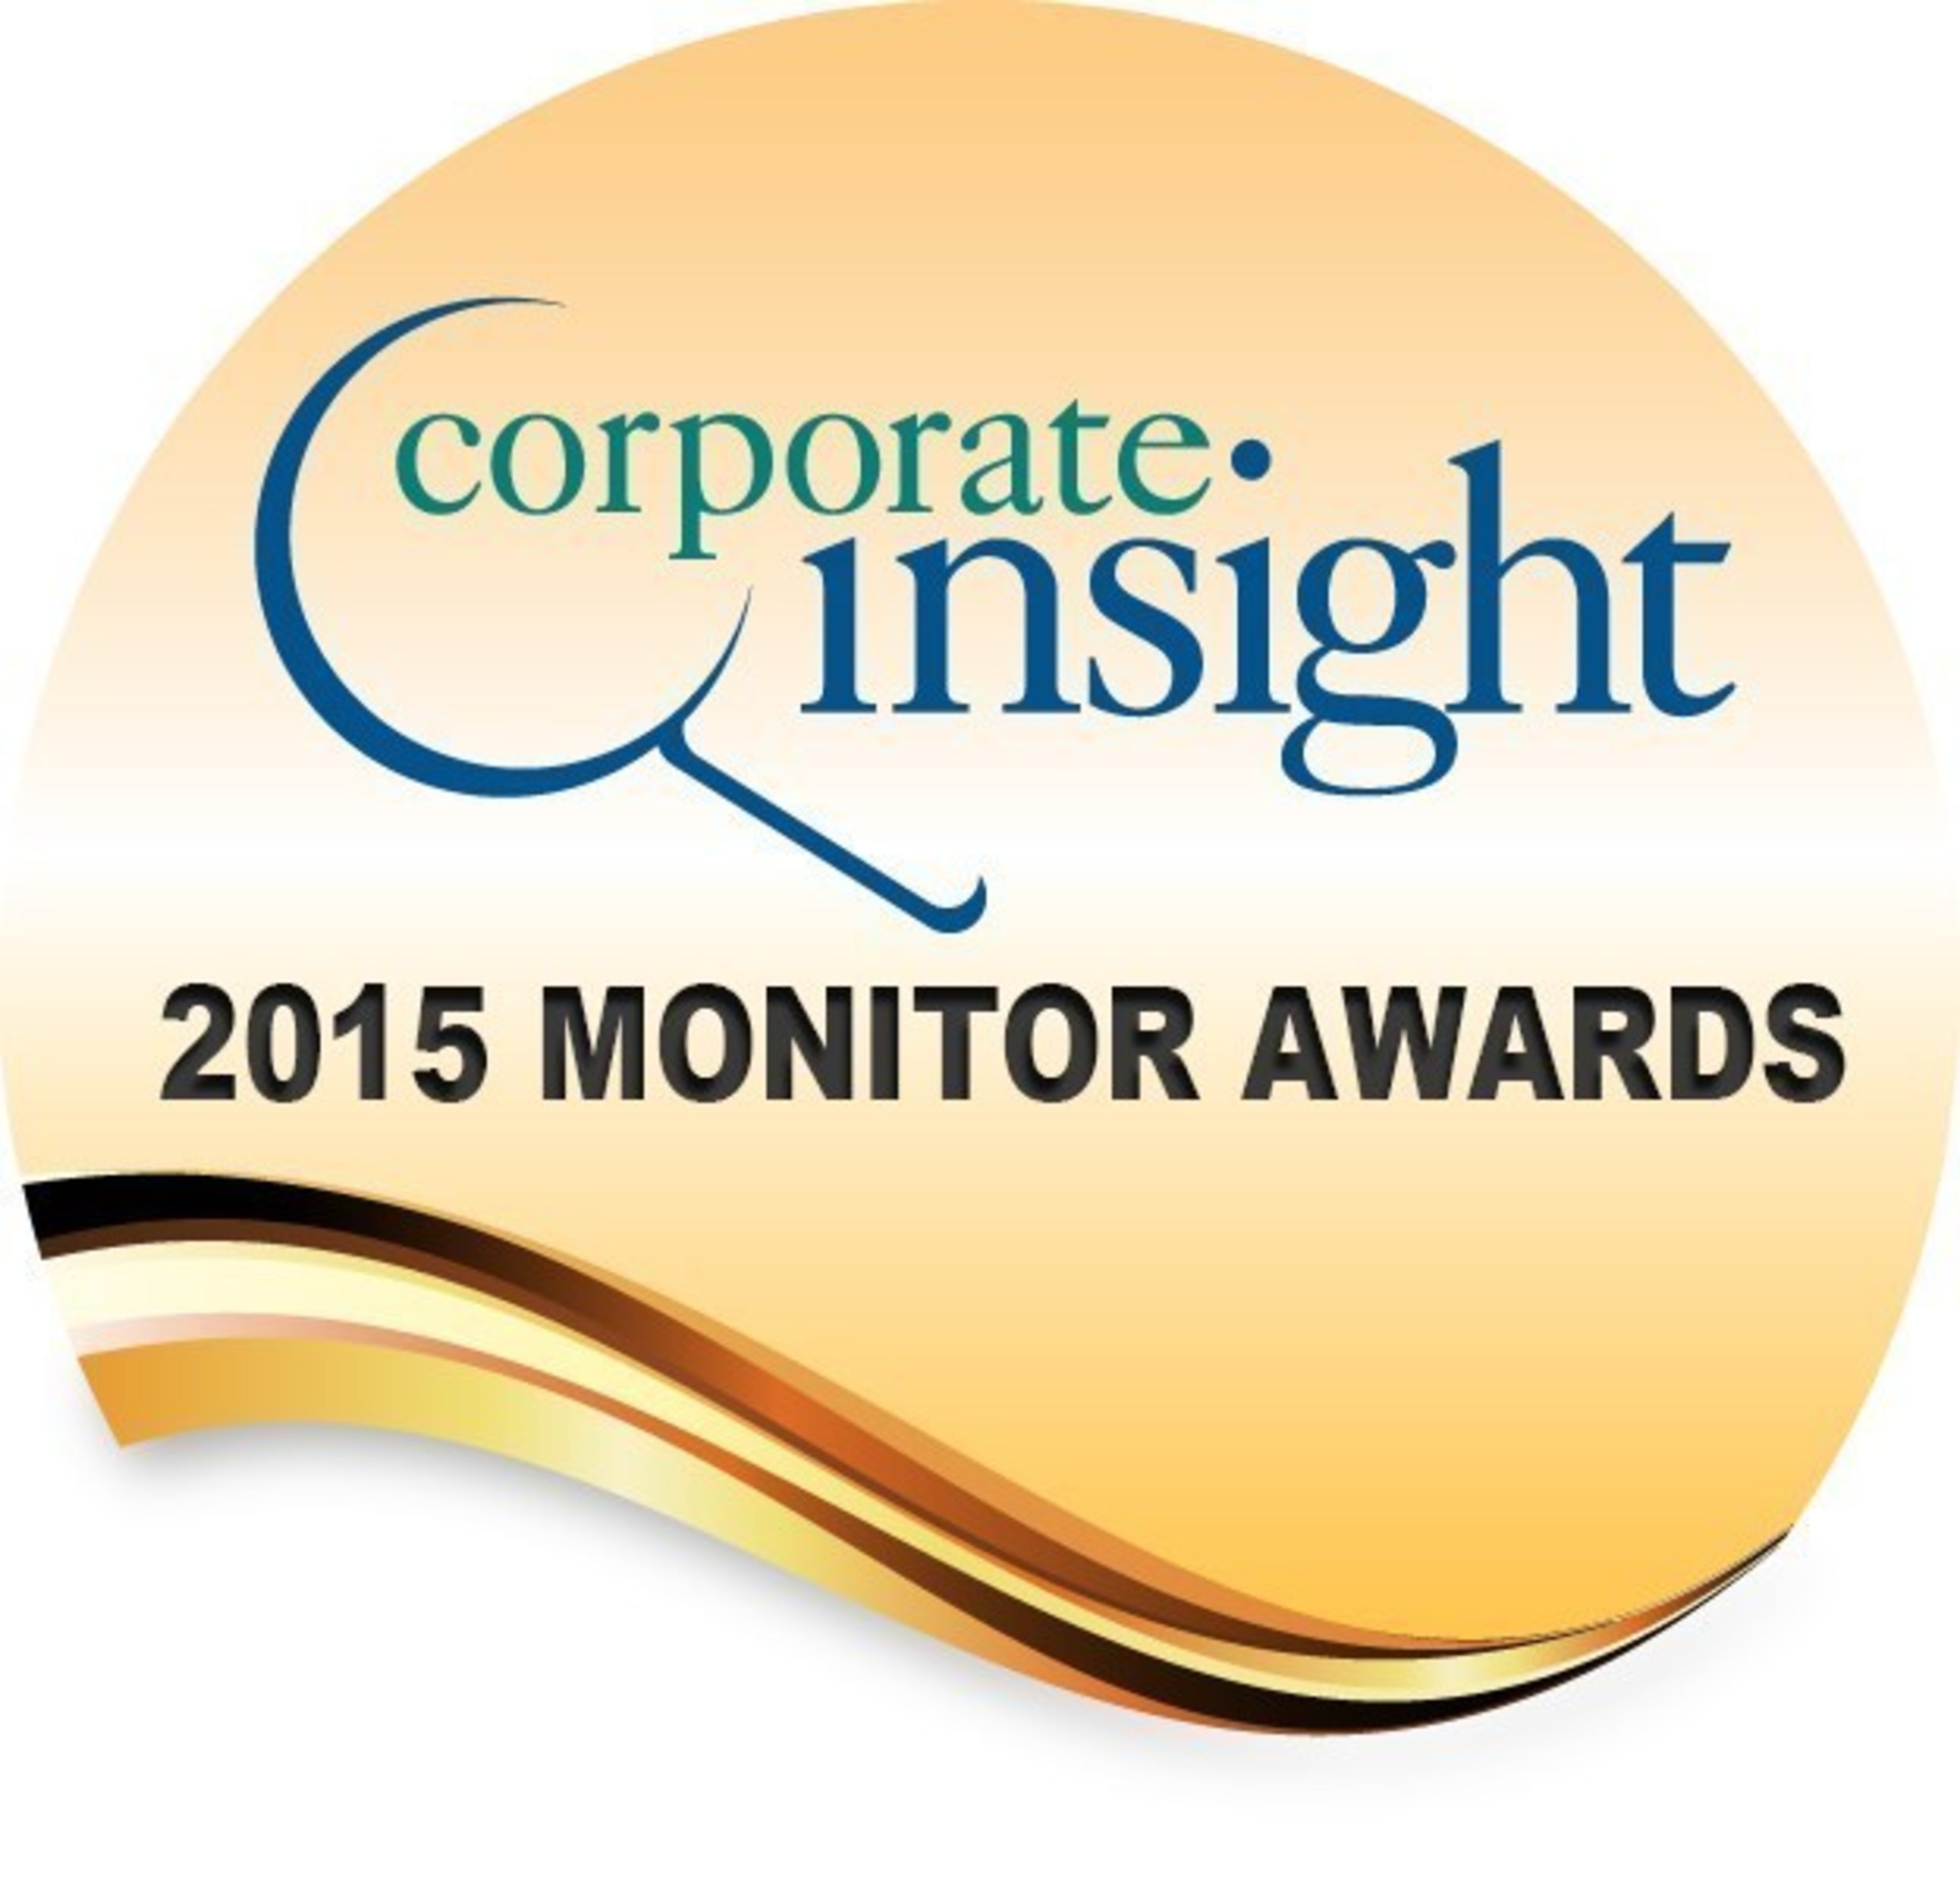 The Monitor Awards are Corporate Insight's annual reports recognizing financial services firms for excellence in the online and offline experience they offer prospects, clients and advisors. The awards are presented to firms across the financial services industry, encompassing annuities, asset management, banking, brokerage, credit cards, insurance and retirement.